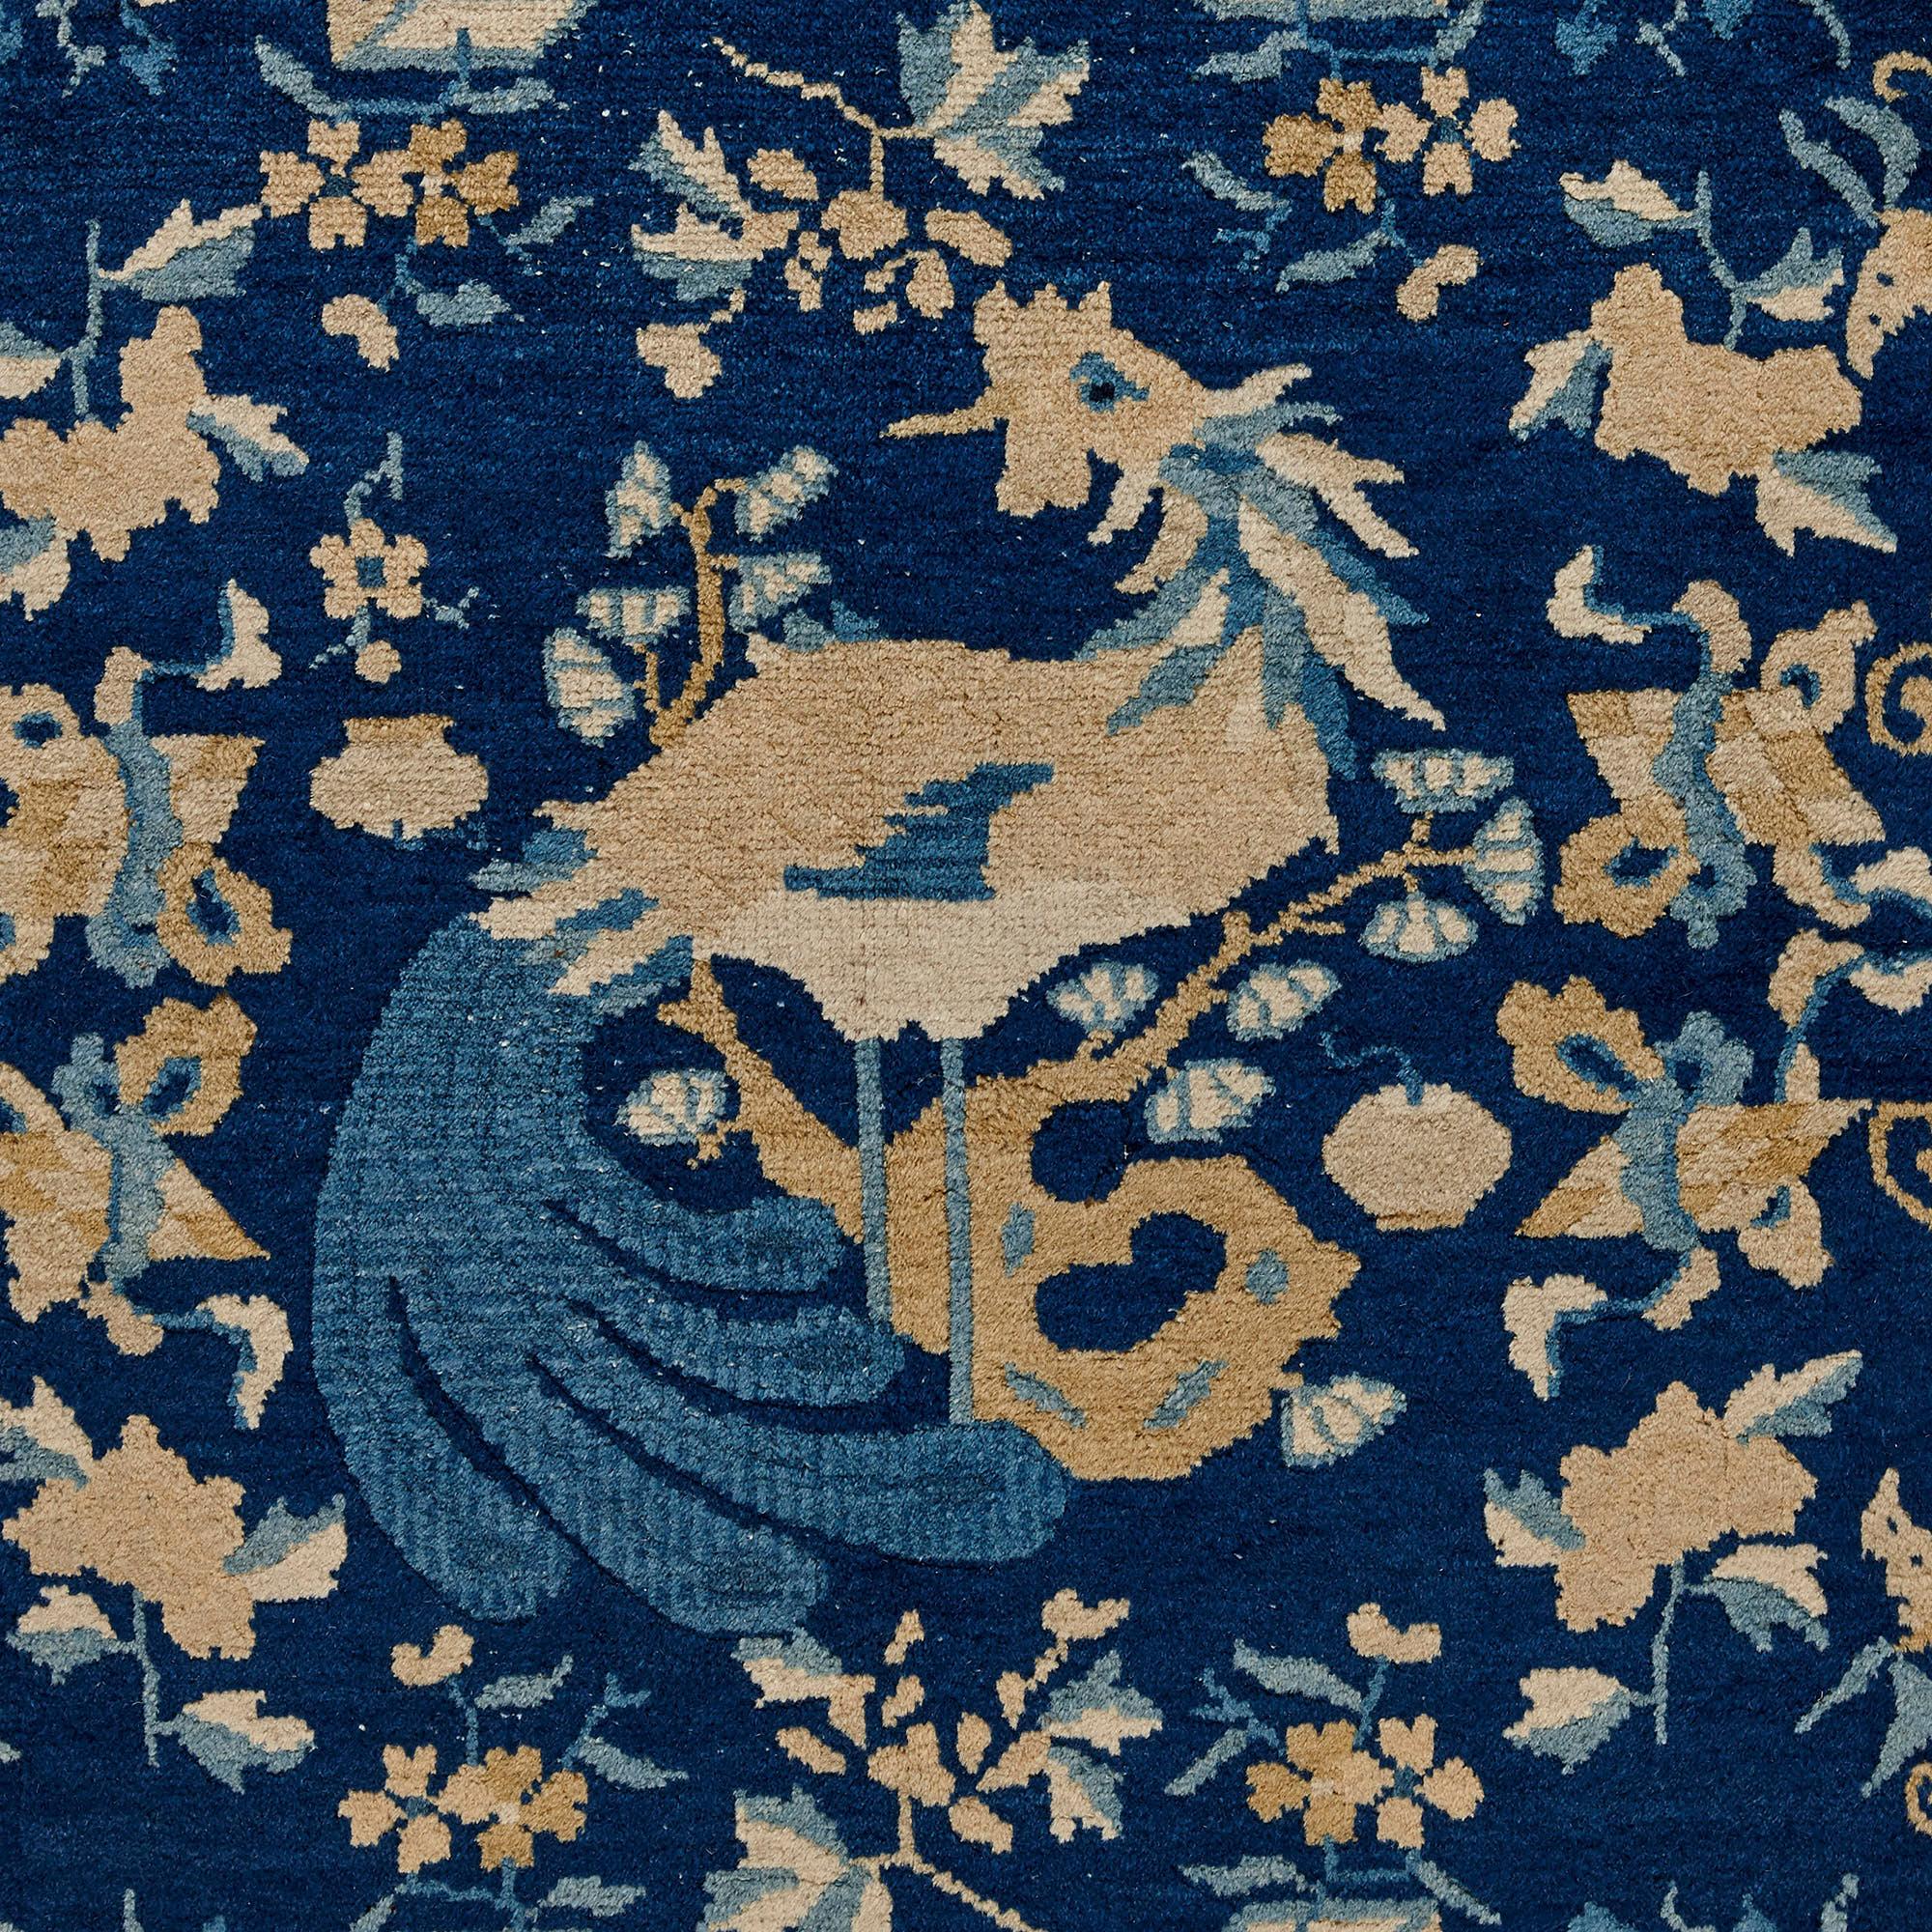 Antique Chinese Peking wool rug
Chinese, c. 1890
Width 268cm, depth 185cm

This find blue-field carpet is from Peking, China, and was created during the last decades of the nineteenth century. The carpet features a rich blue field adorned with